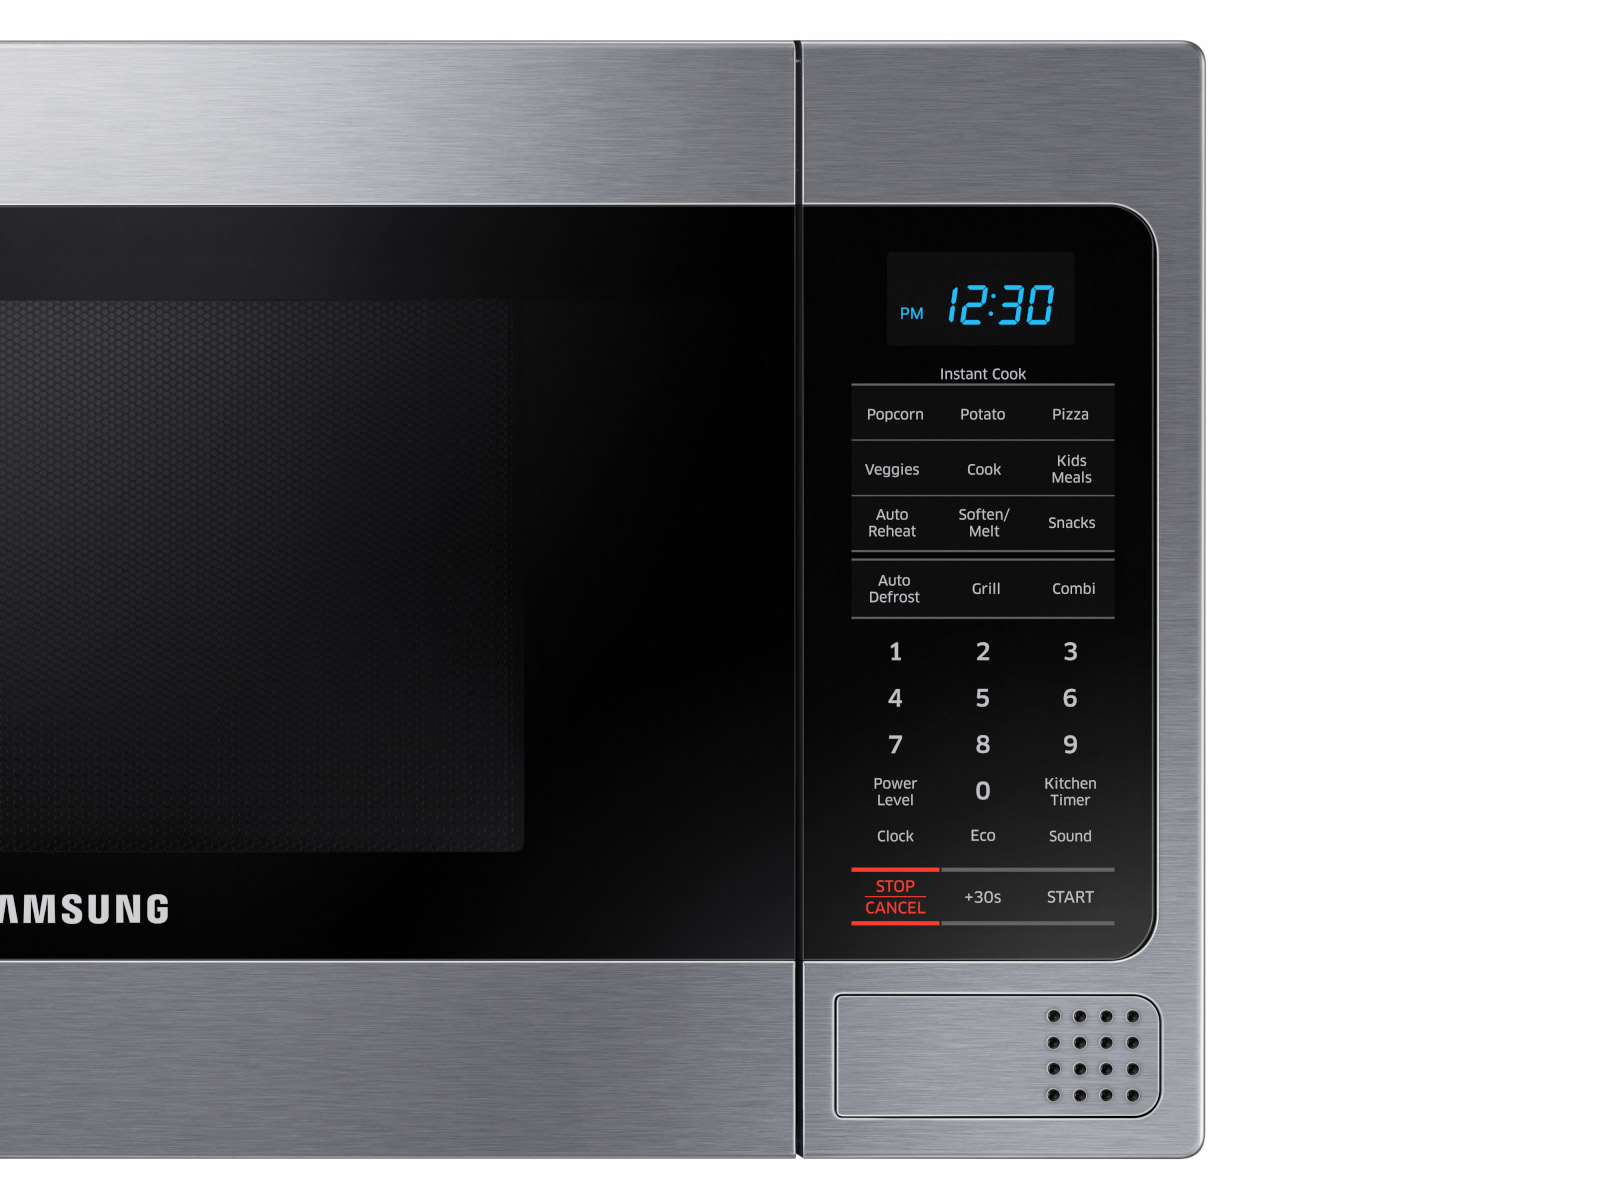 https://image-us.samsung.com/SamsungUS/home/home-appliances/microwaves/countertop/pdp/mg11h2020ct-aa/gallery/03_Microwave_Countertop_MG11H2020CT_Front_Control_Panel_Silver.jpg?$product-details-jpg$